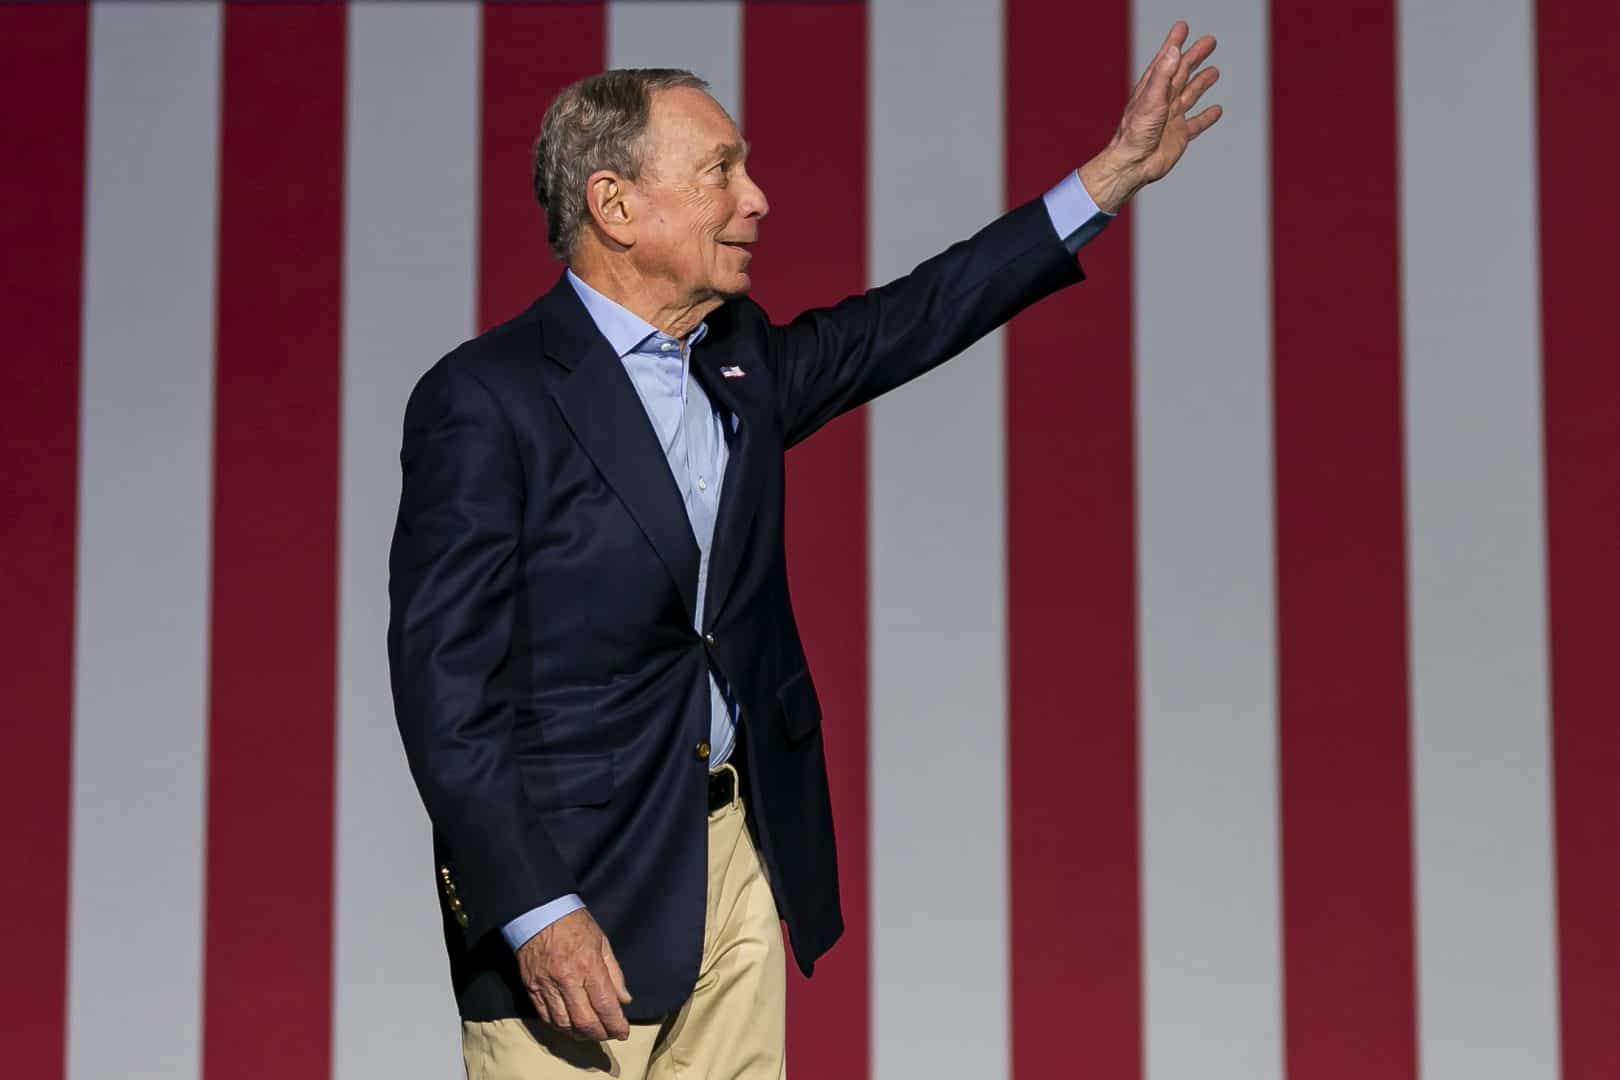 Mike Bloomberg ‘to reconsider campaign’ after lacklustre Super Tuesday results